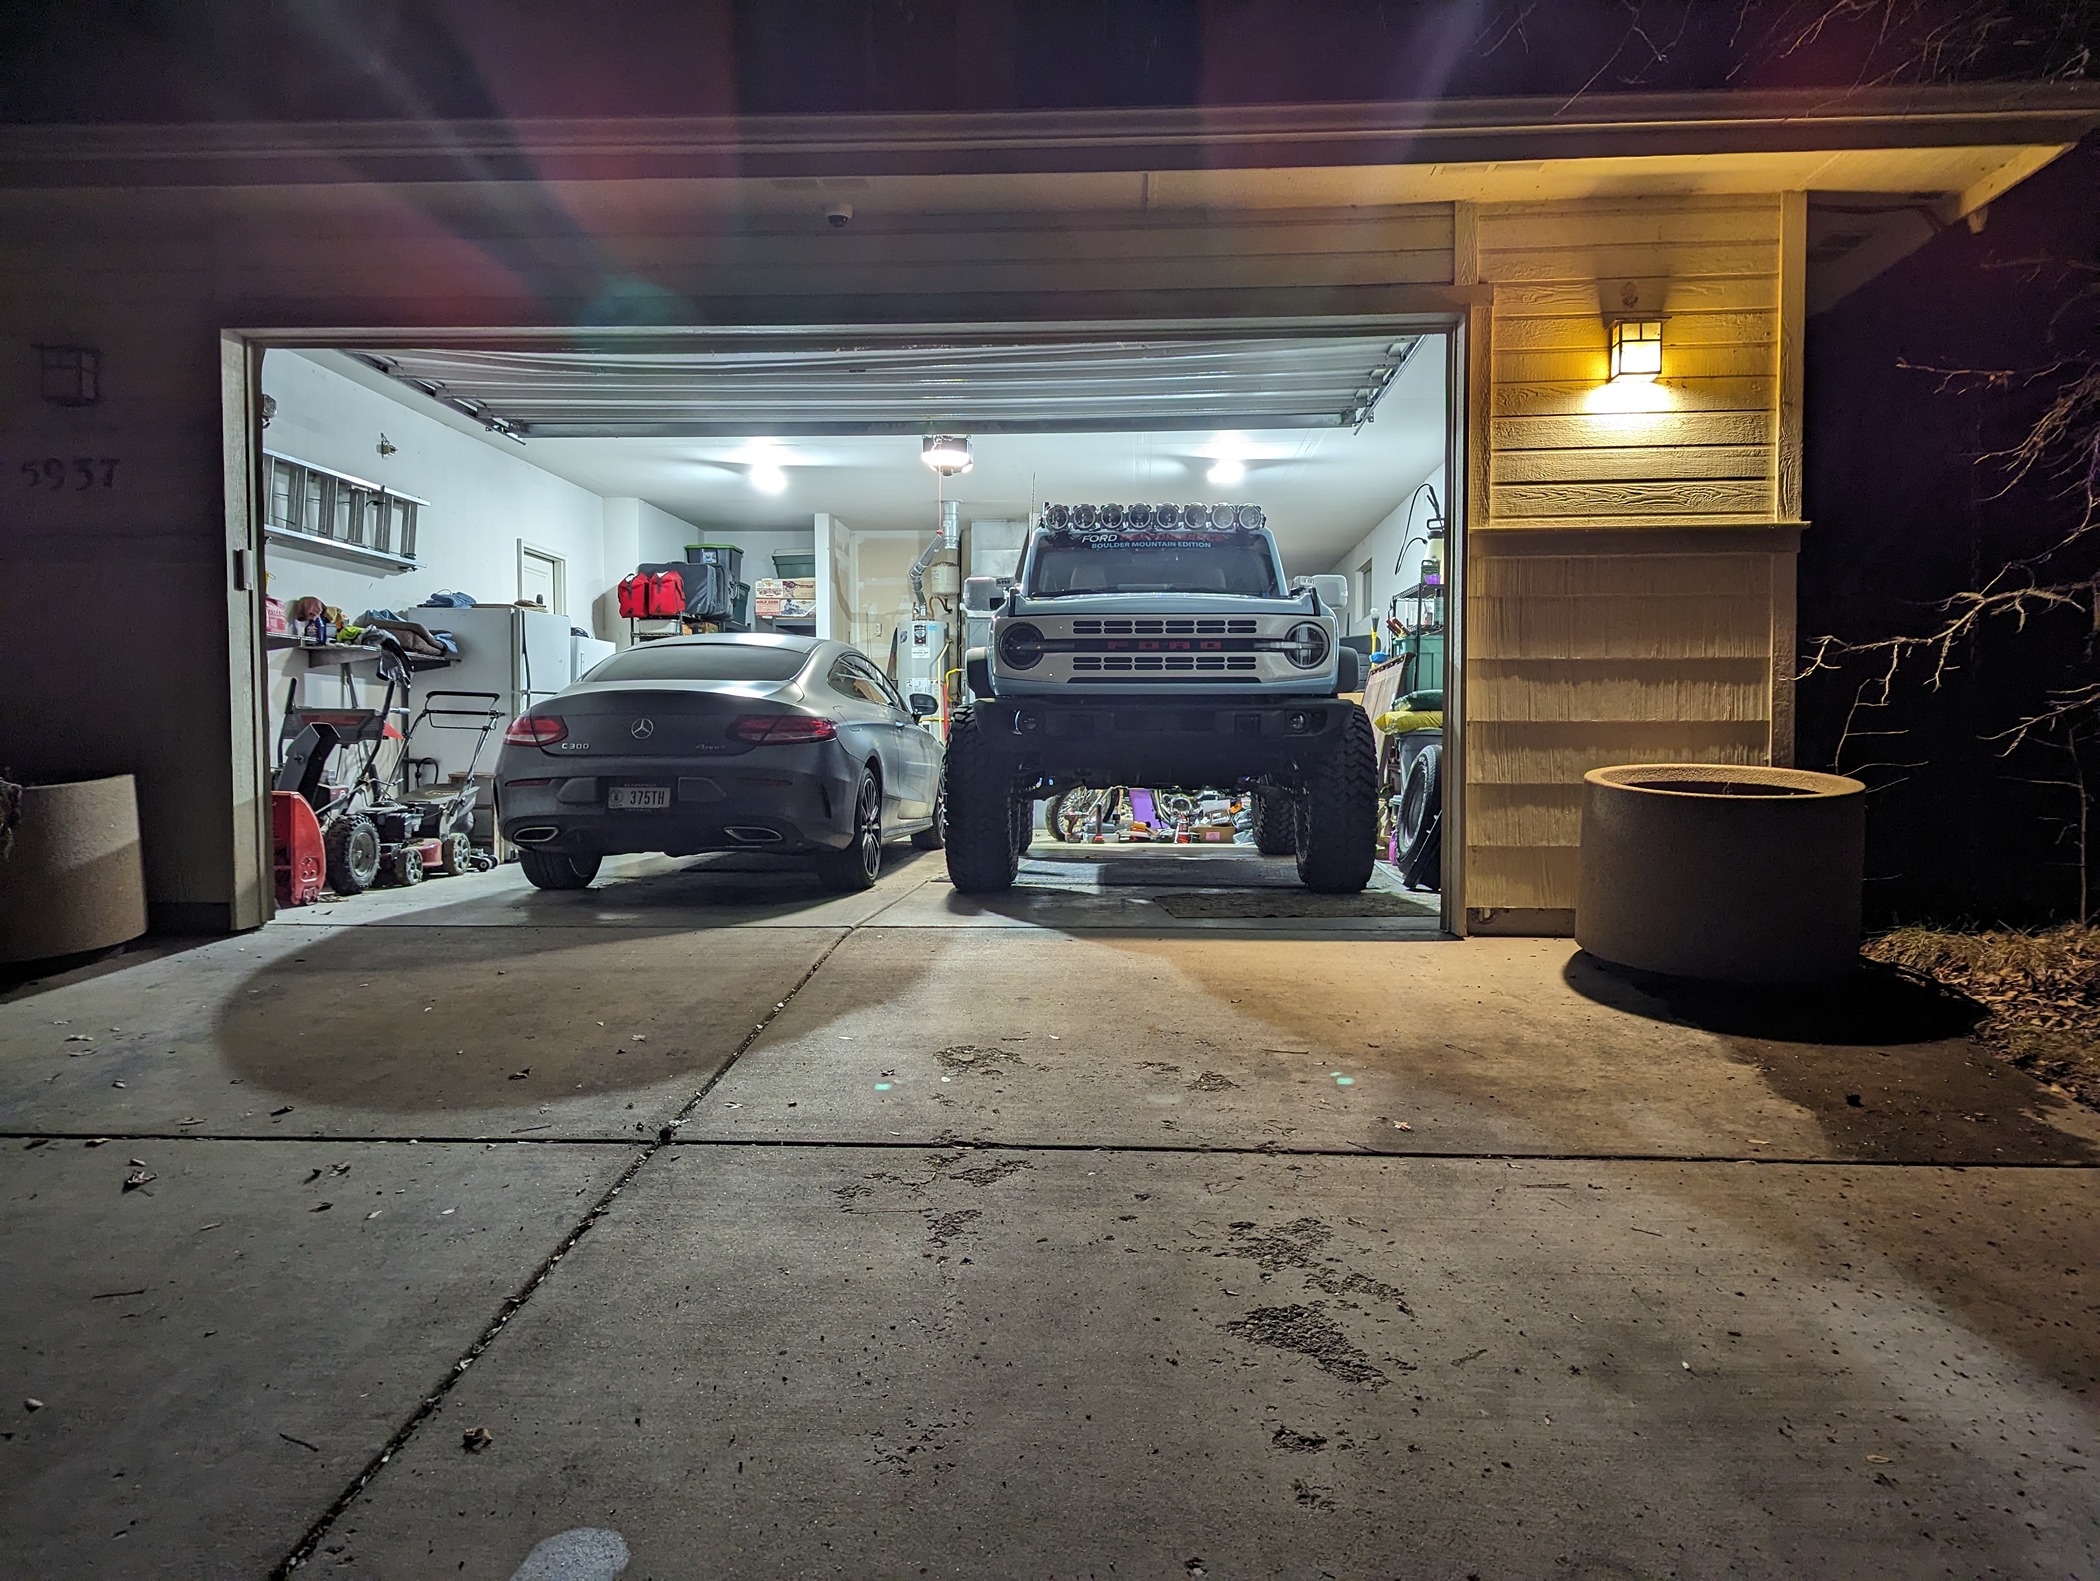 Ford Bronco HERITAGE EDITION Bronco Club clears garage